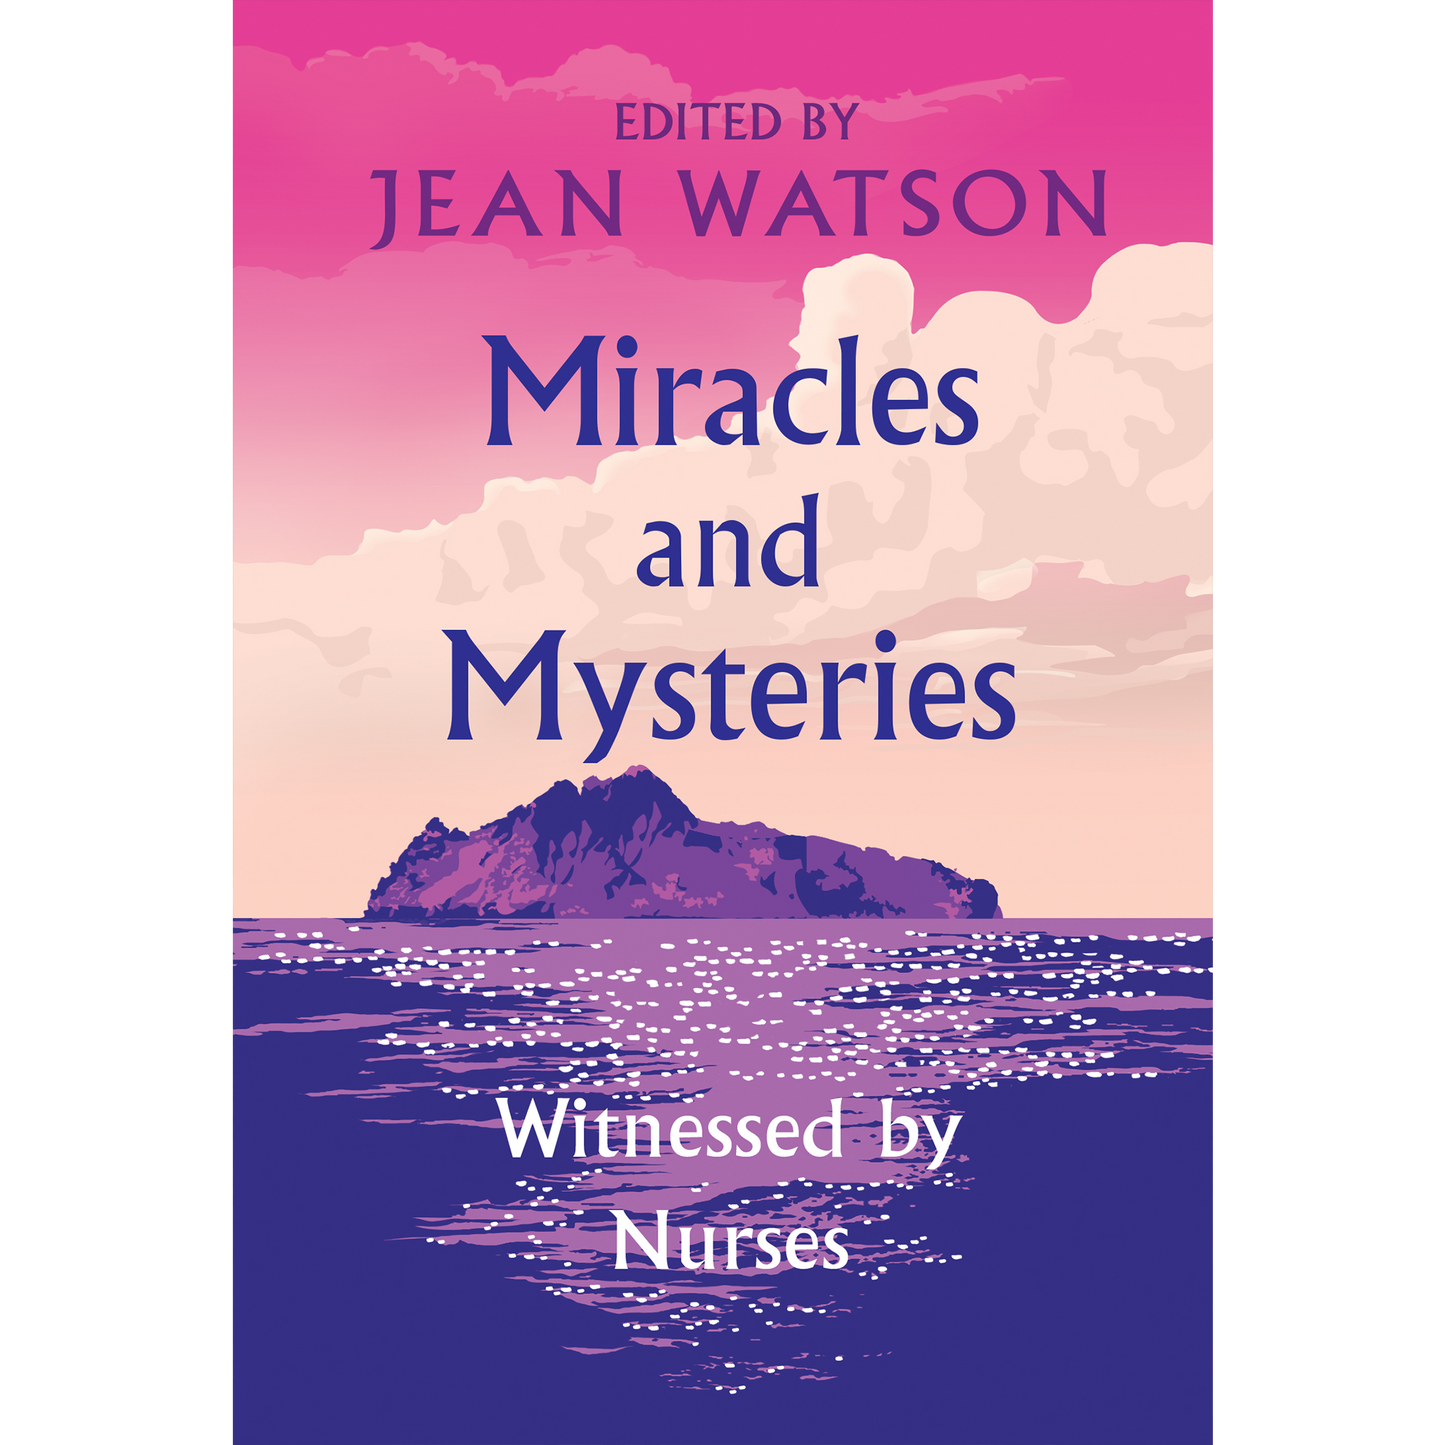 Explore the miracles and mysteries of life with Miracles and Mysteries by Dr. Jean Watson. This collection of stories, essays, and anecdotes highlights the power of faith and celebrates the beauty of everyday moments. With inspiring words and insightful analysis from Dr. Watson, this book will help you expand your understanding of the unknown and deepen your appreciation for caring science.